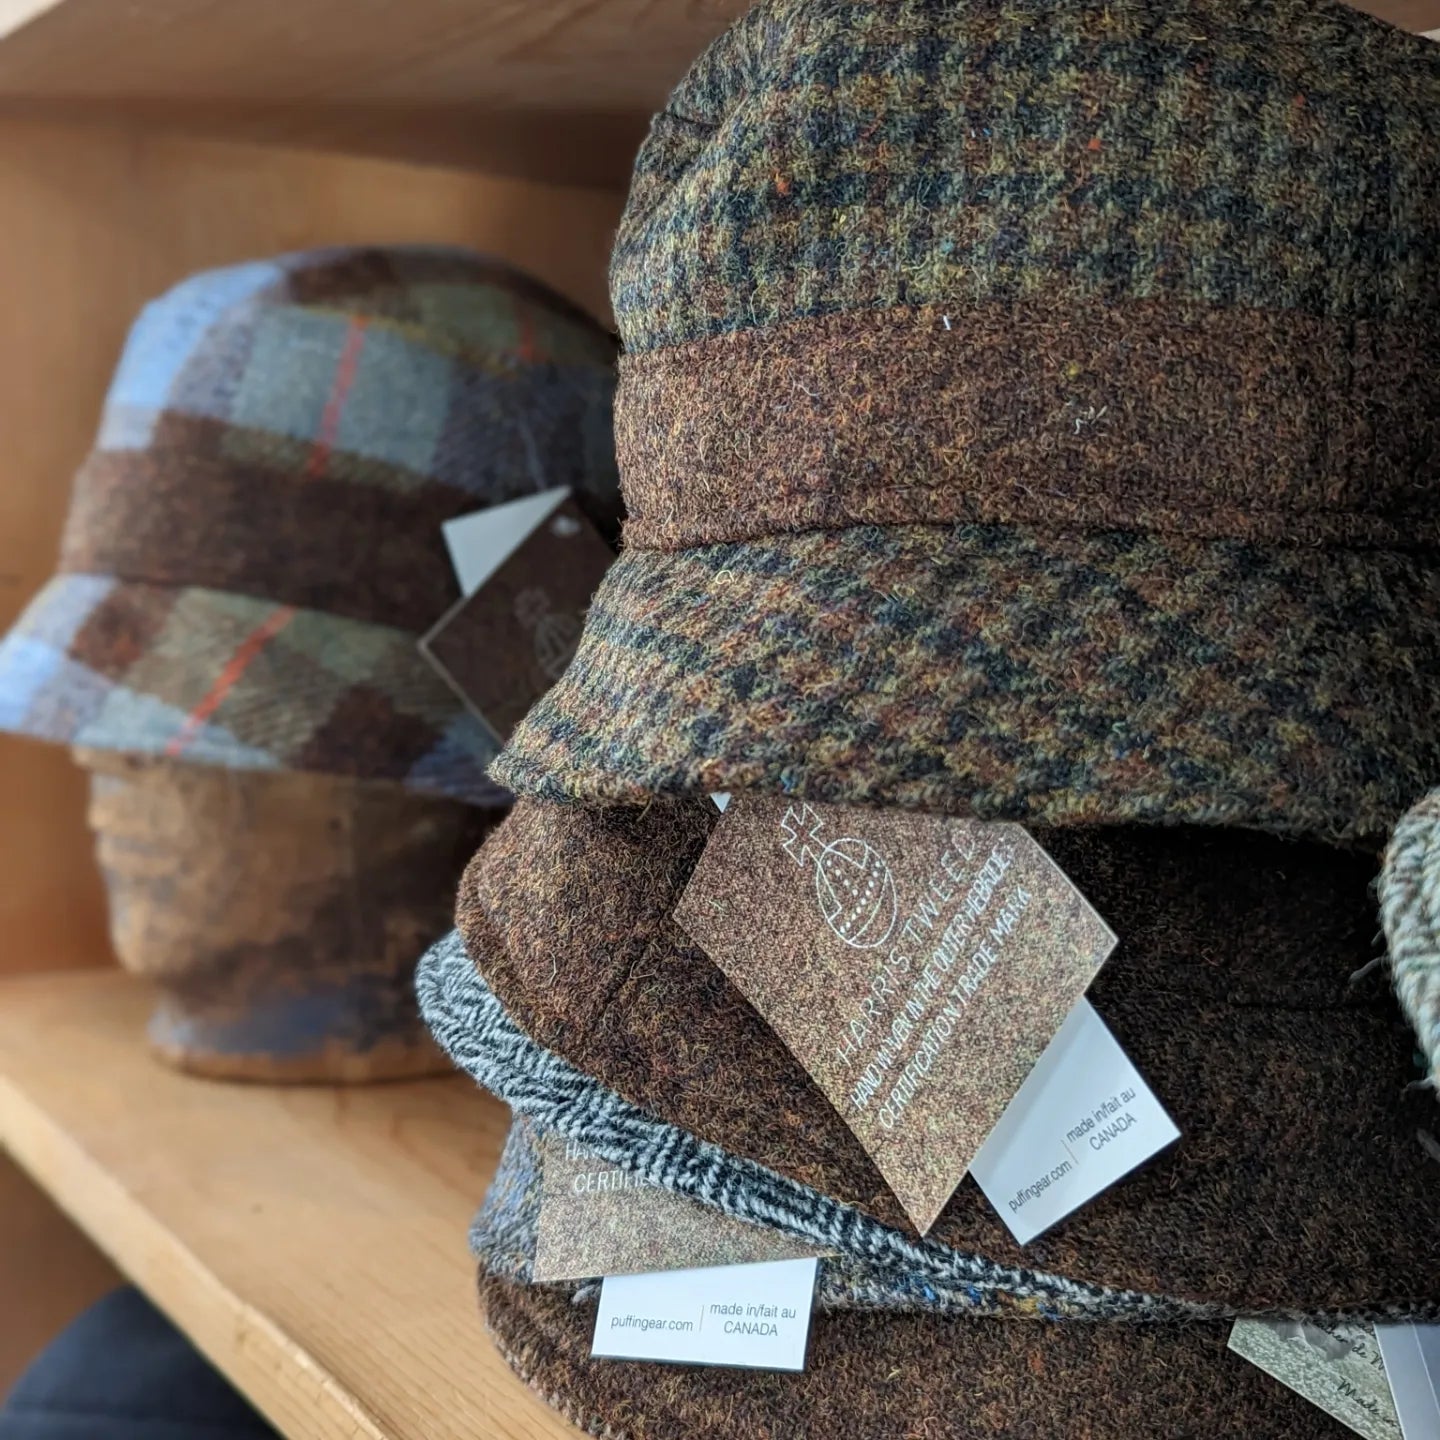 Shop in Store for Harris Tweed Hats, Polartec Fleece Hats, Sun Protection Hats, Kids Hats, Adult Hats and so much more.  Shop in the studio where everything is made.  Toronto Canada